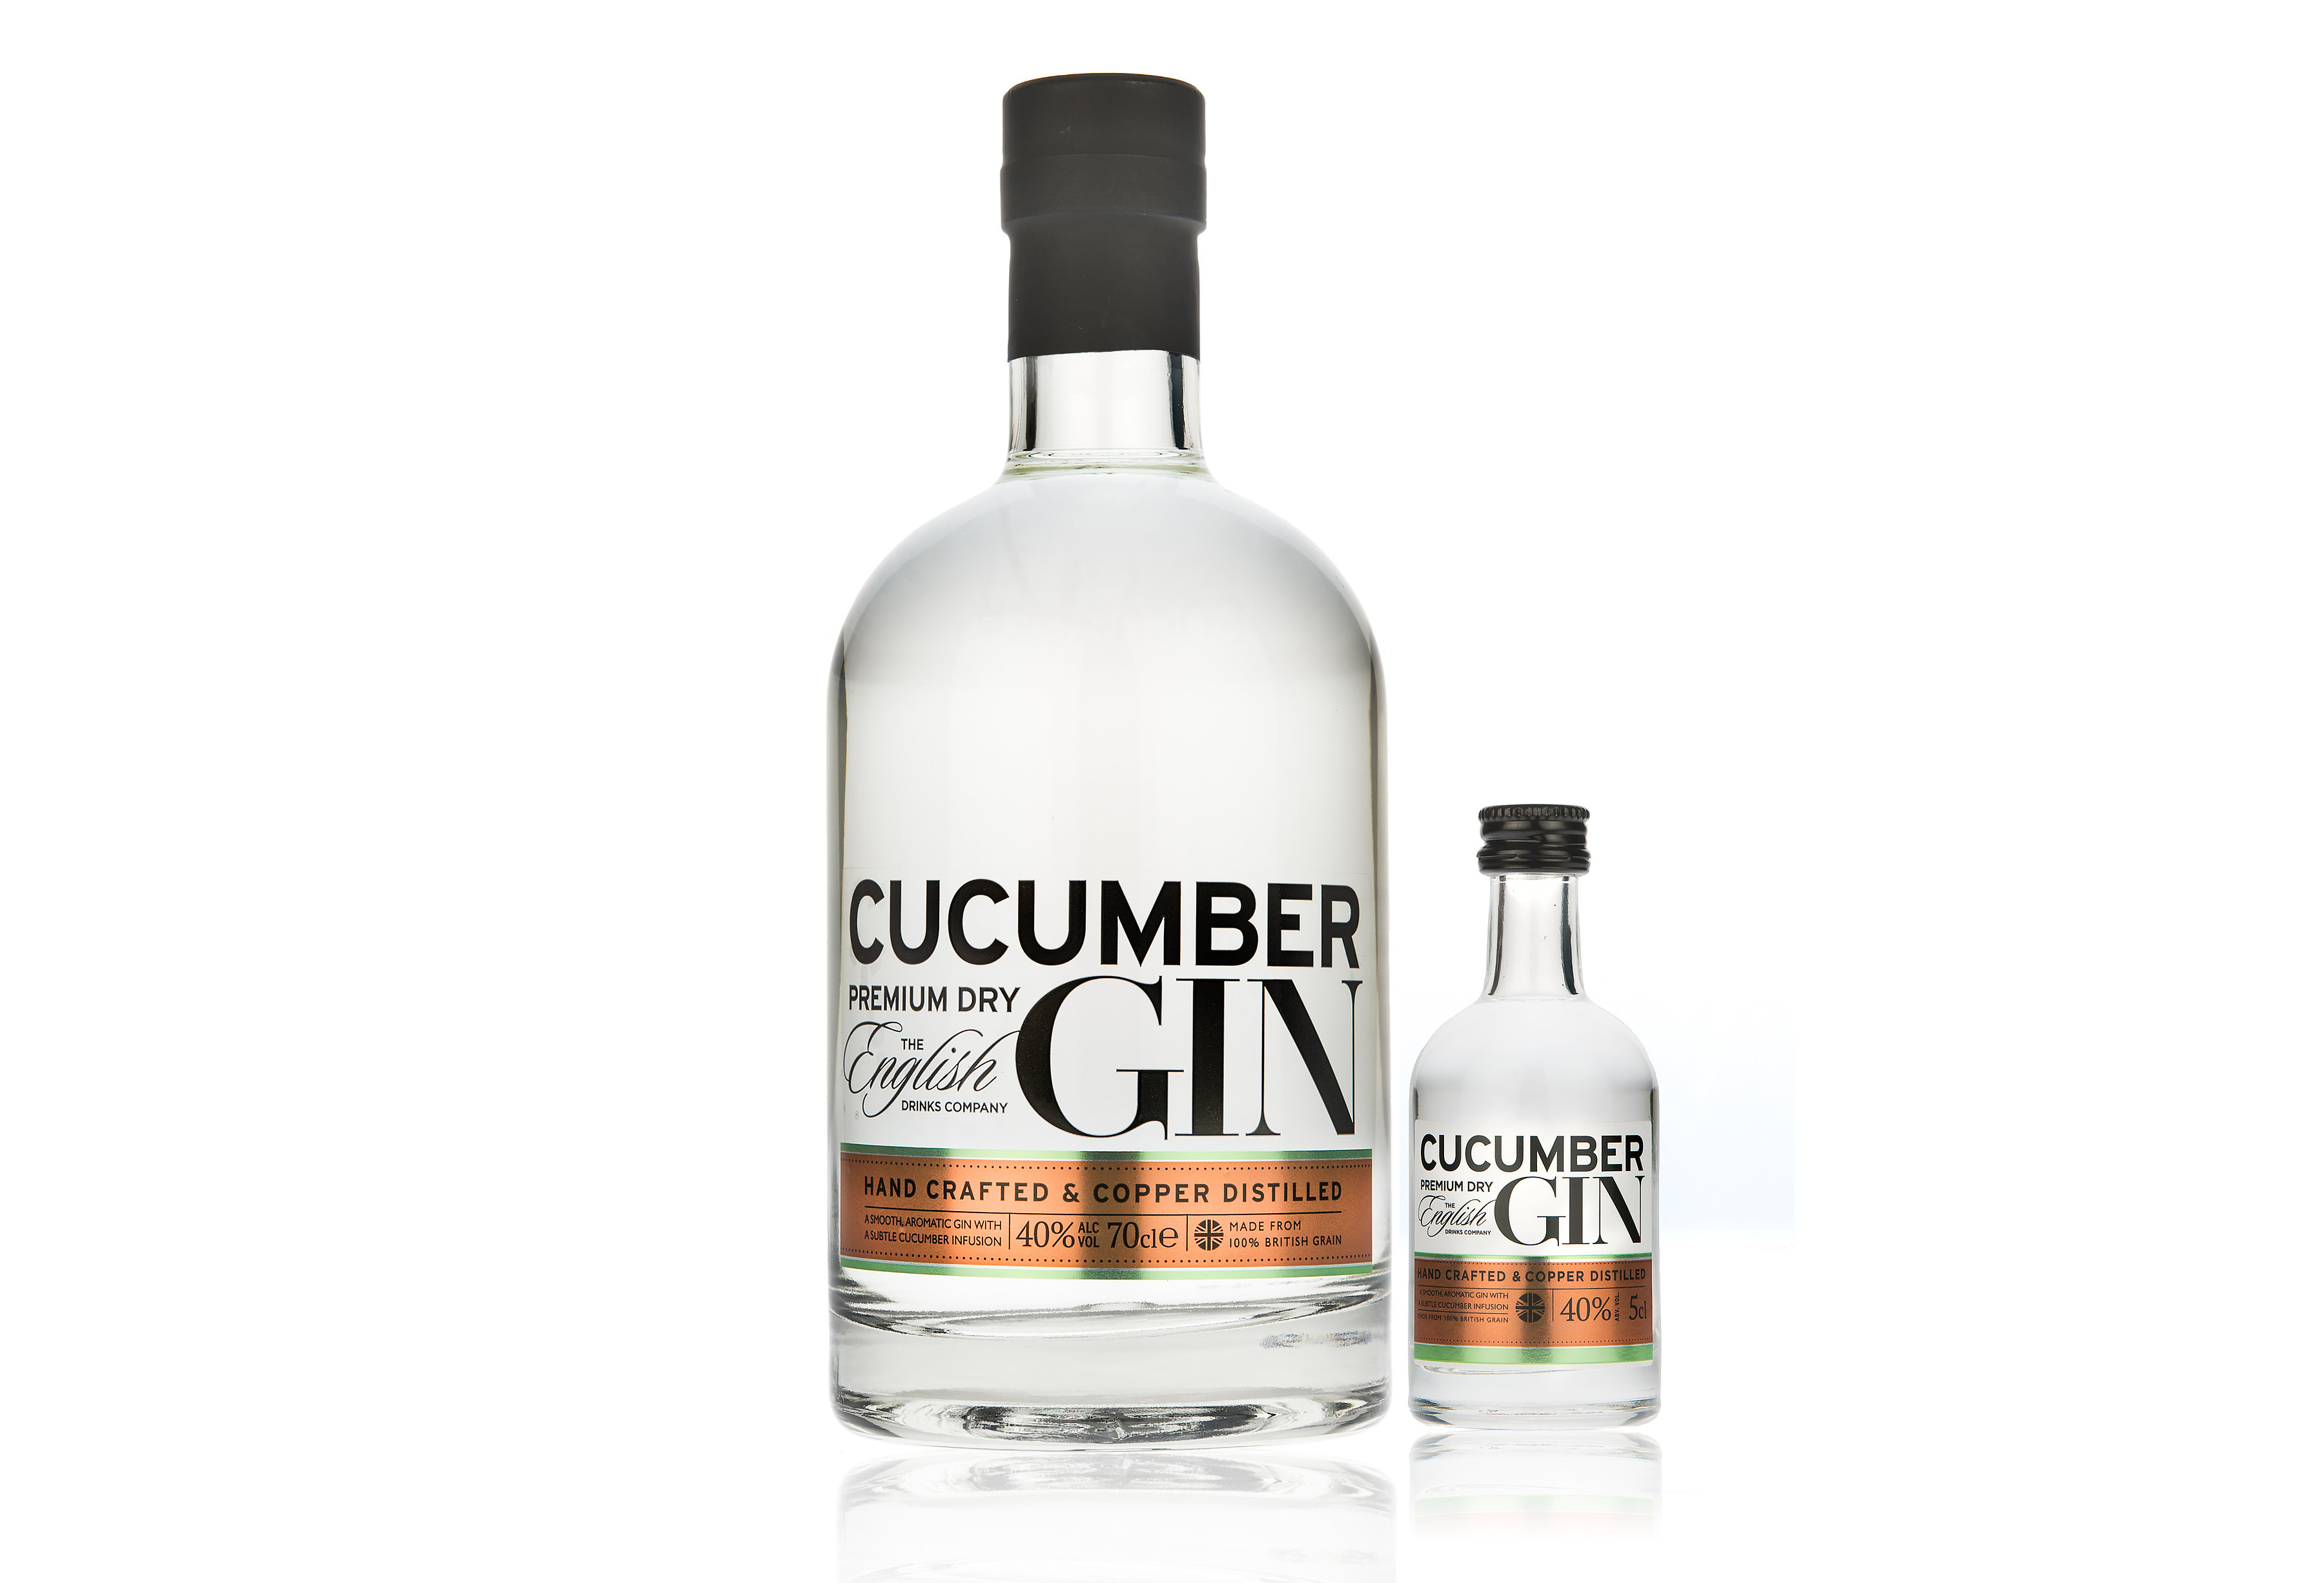 The English Drinks Company's Cucumber Gin Miniatures